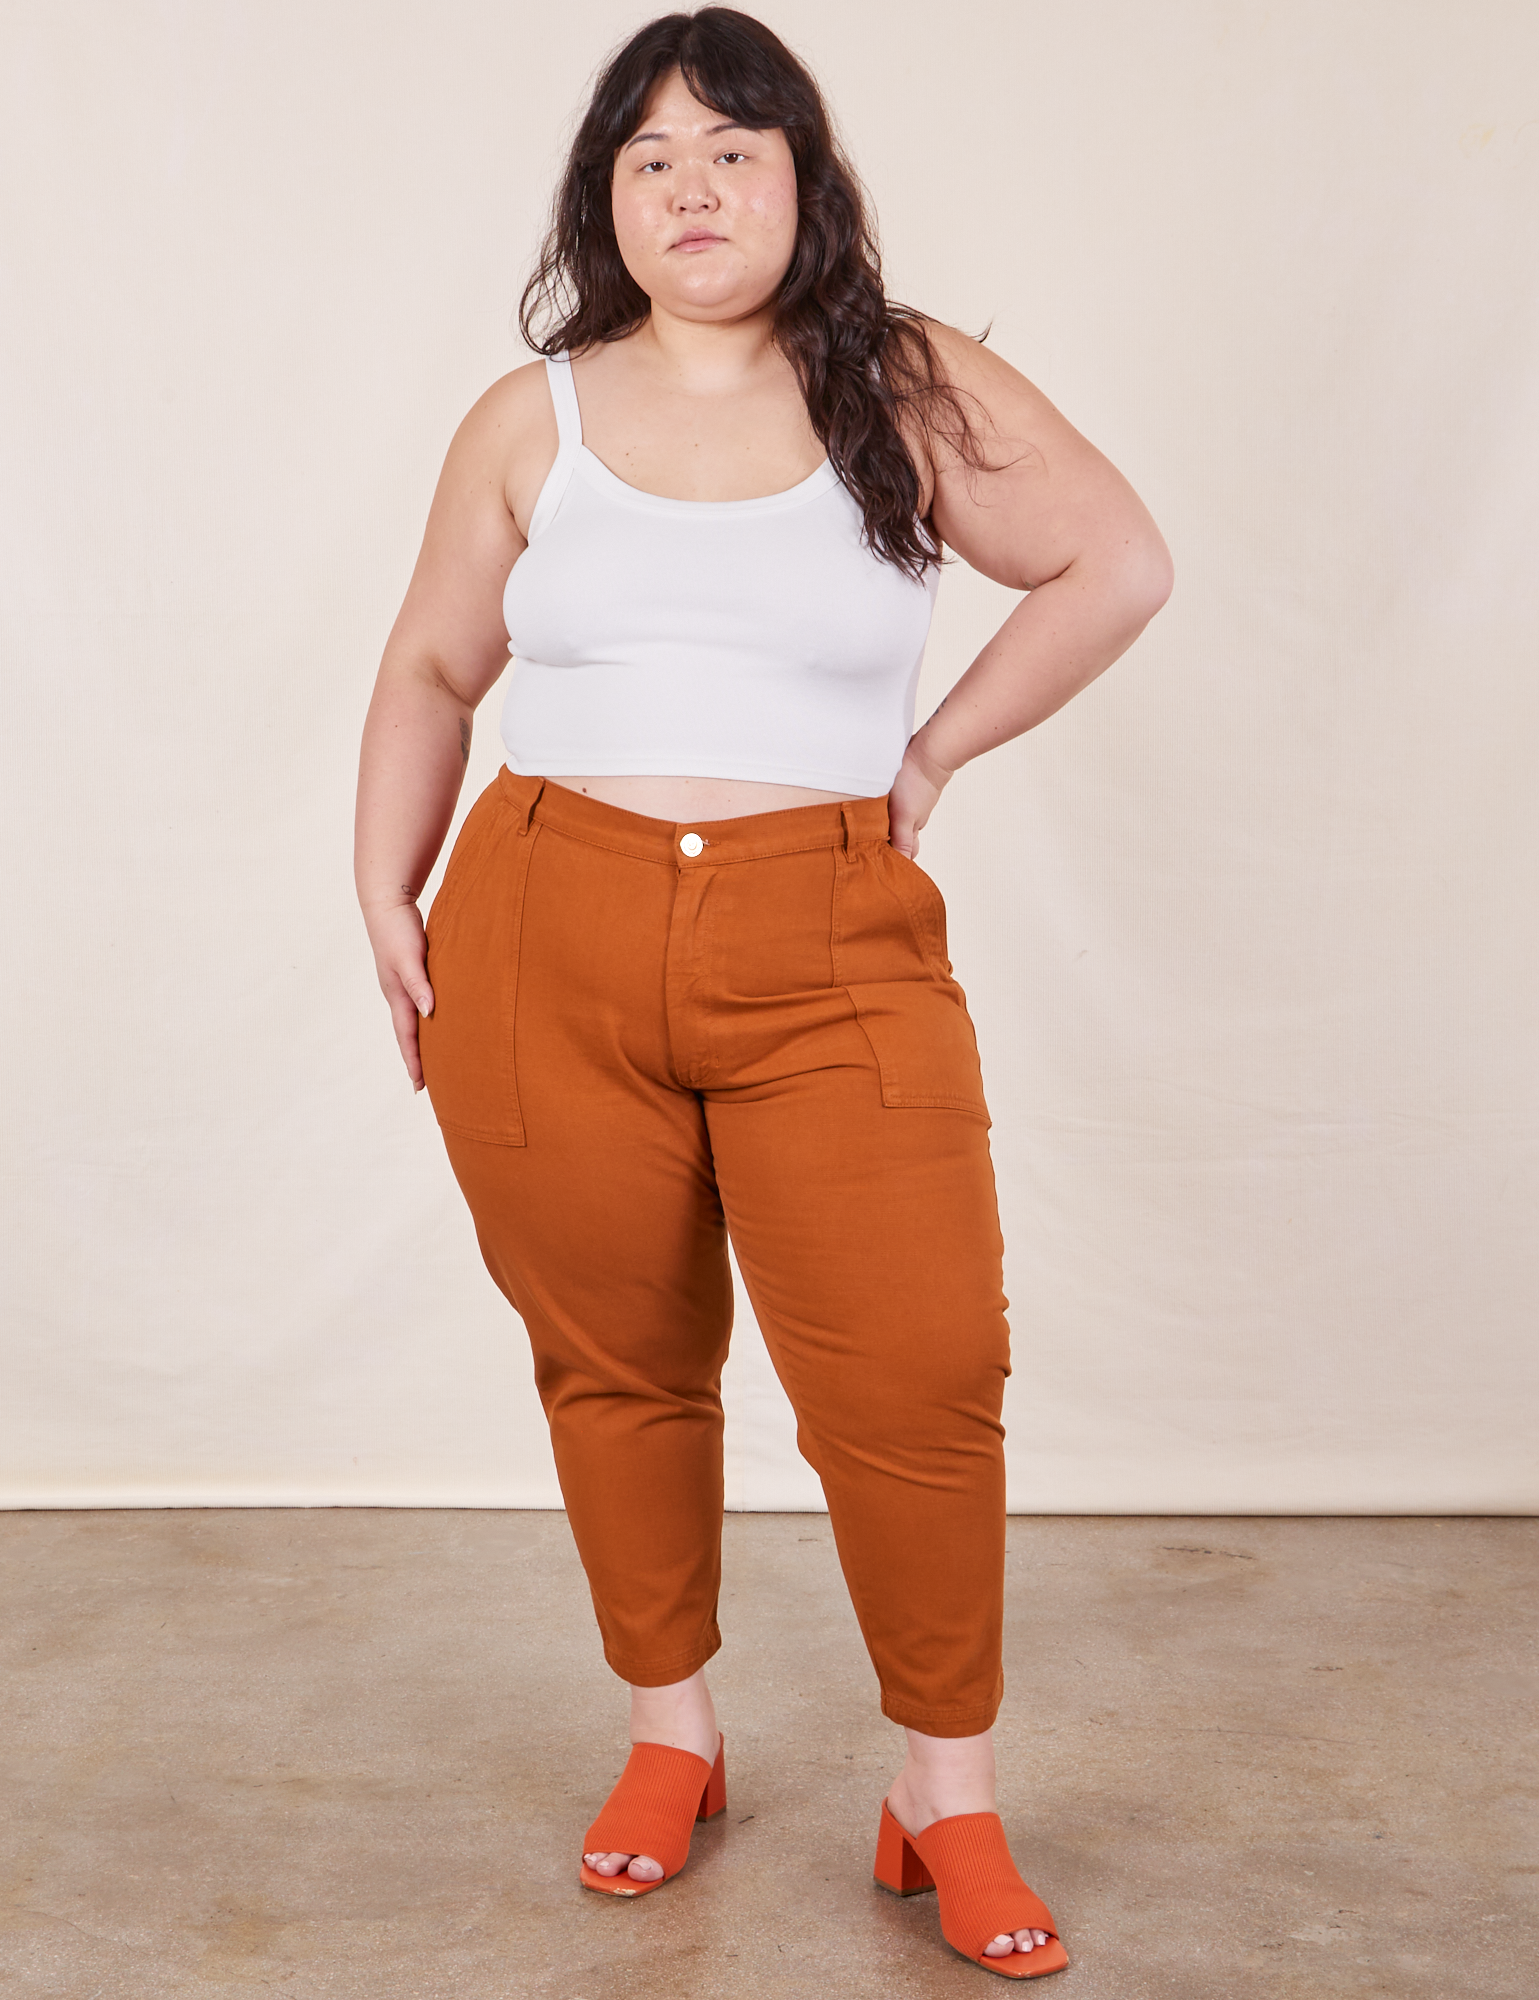 Ashley is 5&#39;7&quot; and wearing 1XL Petite Pencil Pants in Burnt Terracotta paired with vintage off-white Cropped Cami